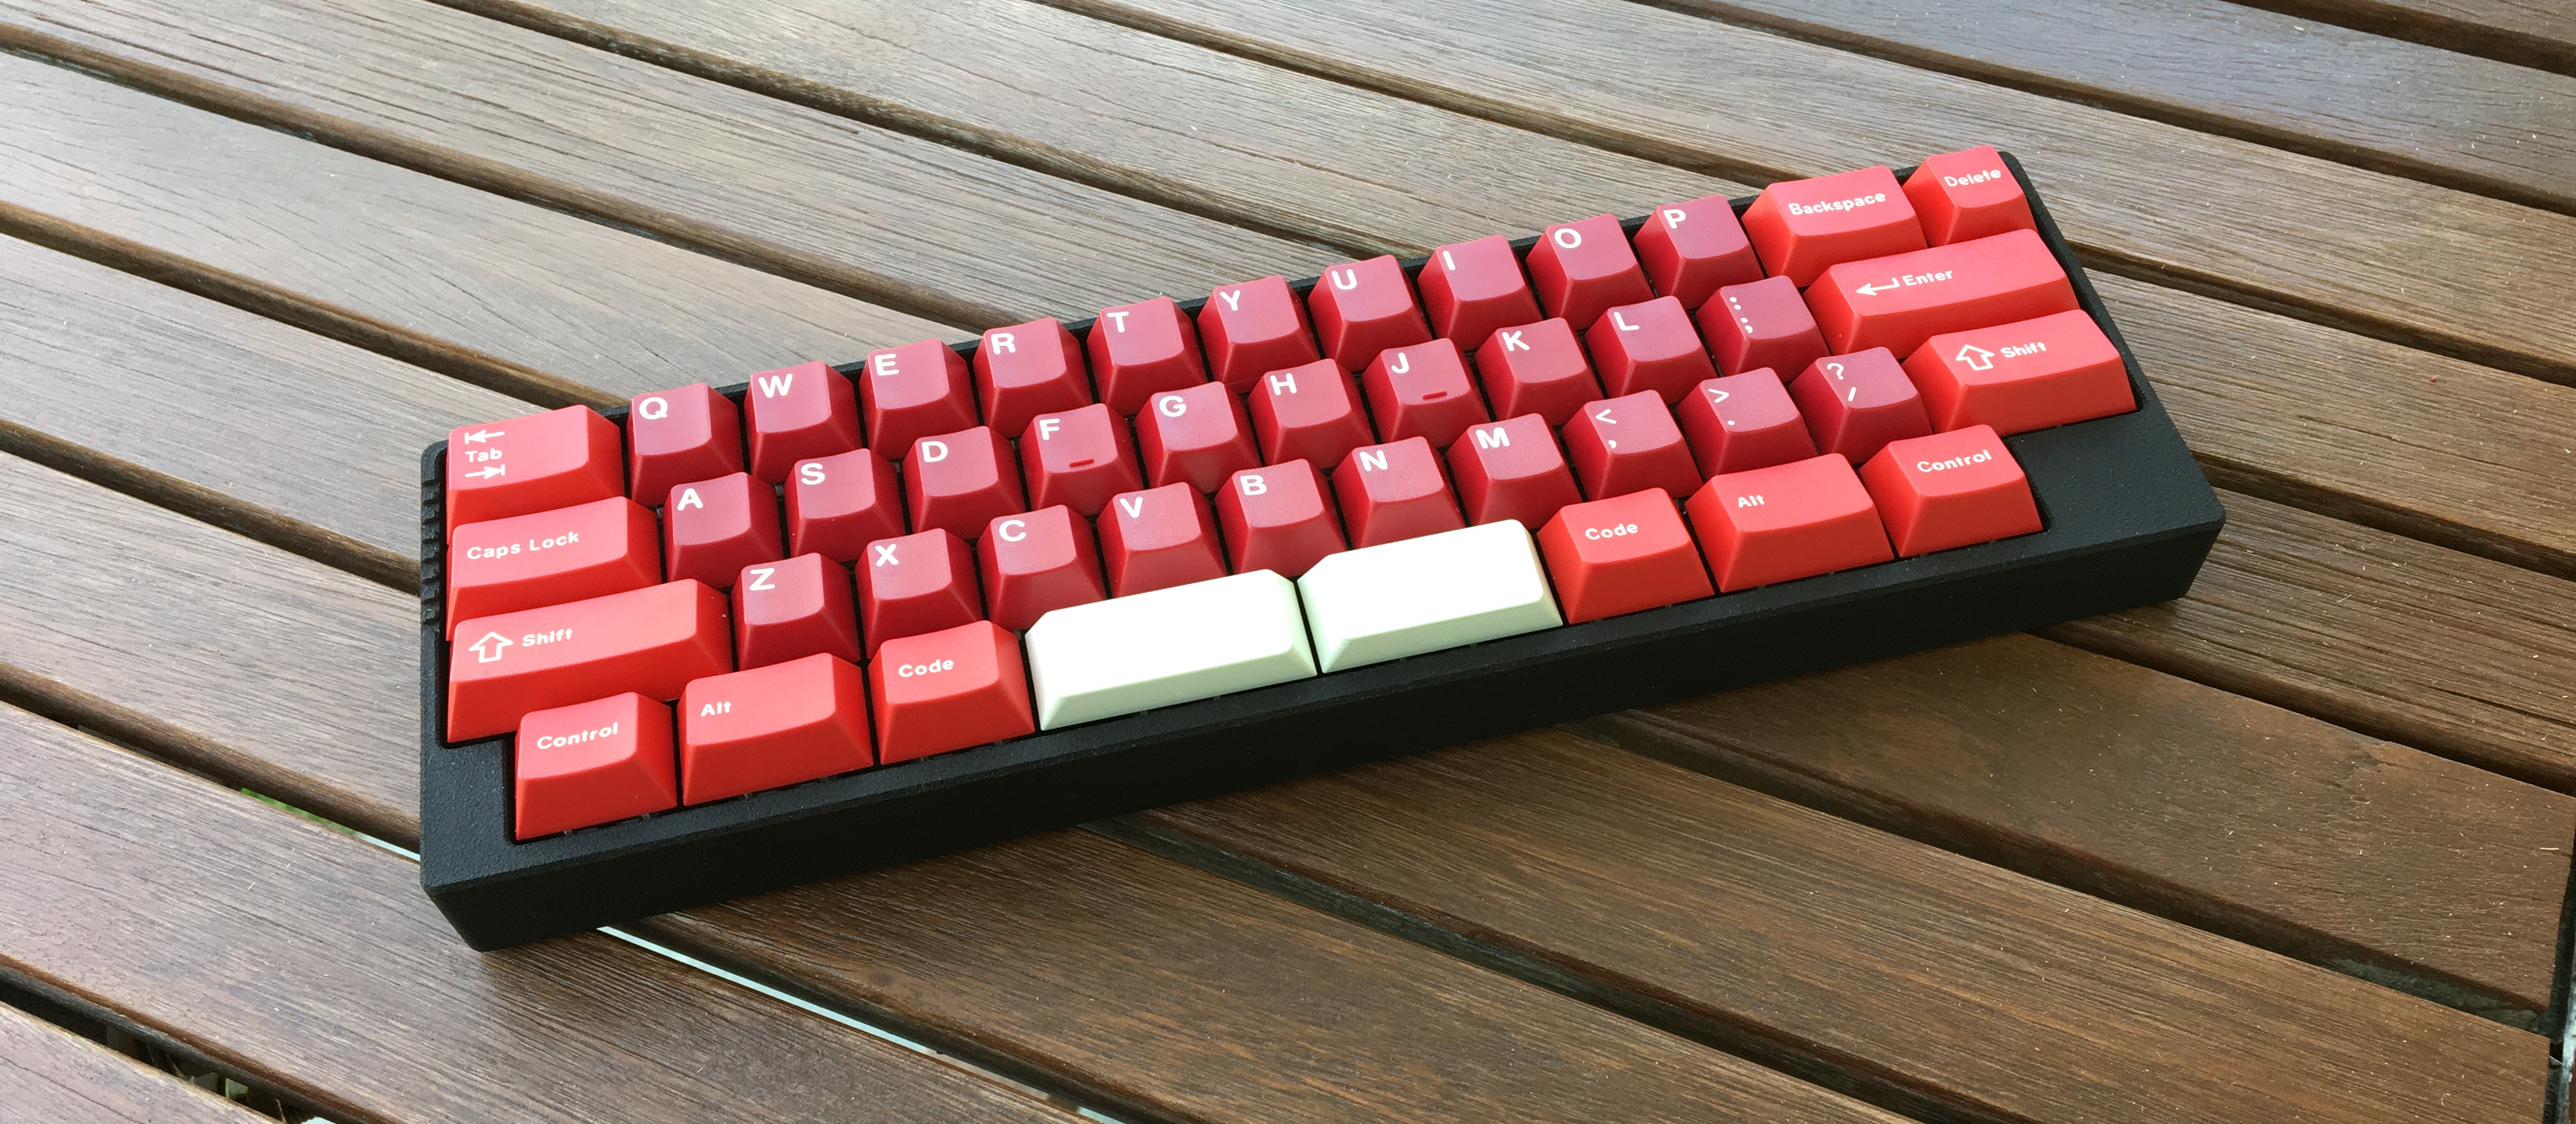 TtocyobItna with GMK Jamón. GMK Jamón does not include any 1.75u row 2 keys which prevents it from having full compatibility with a standard MiniVan